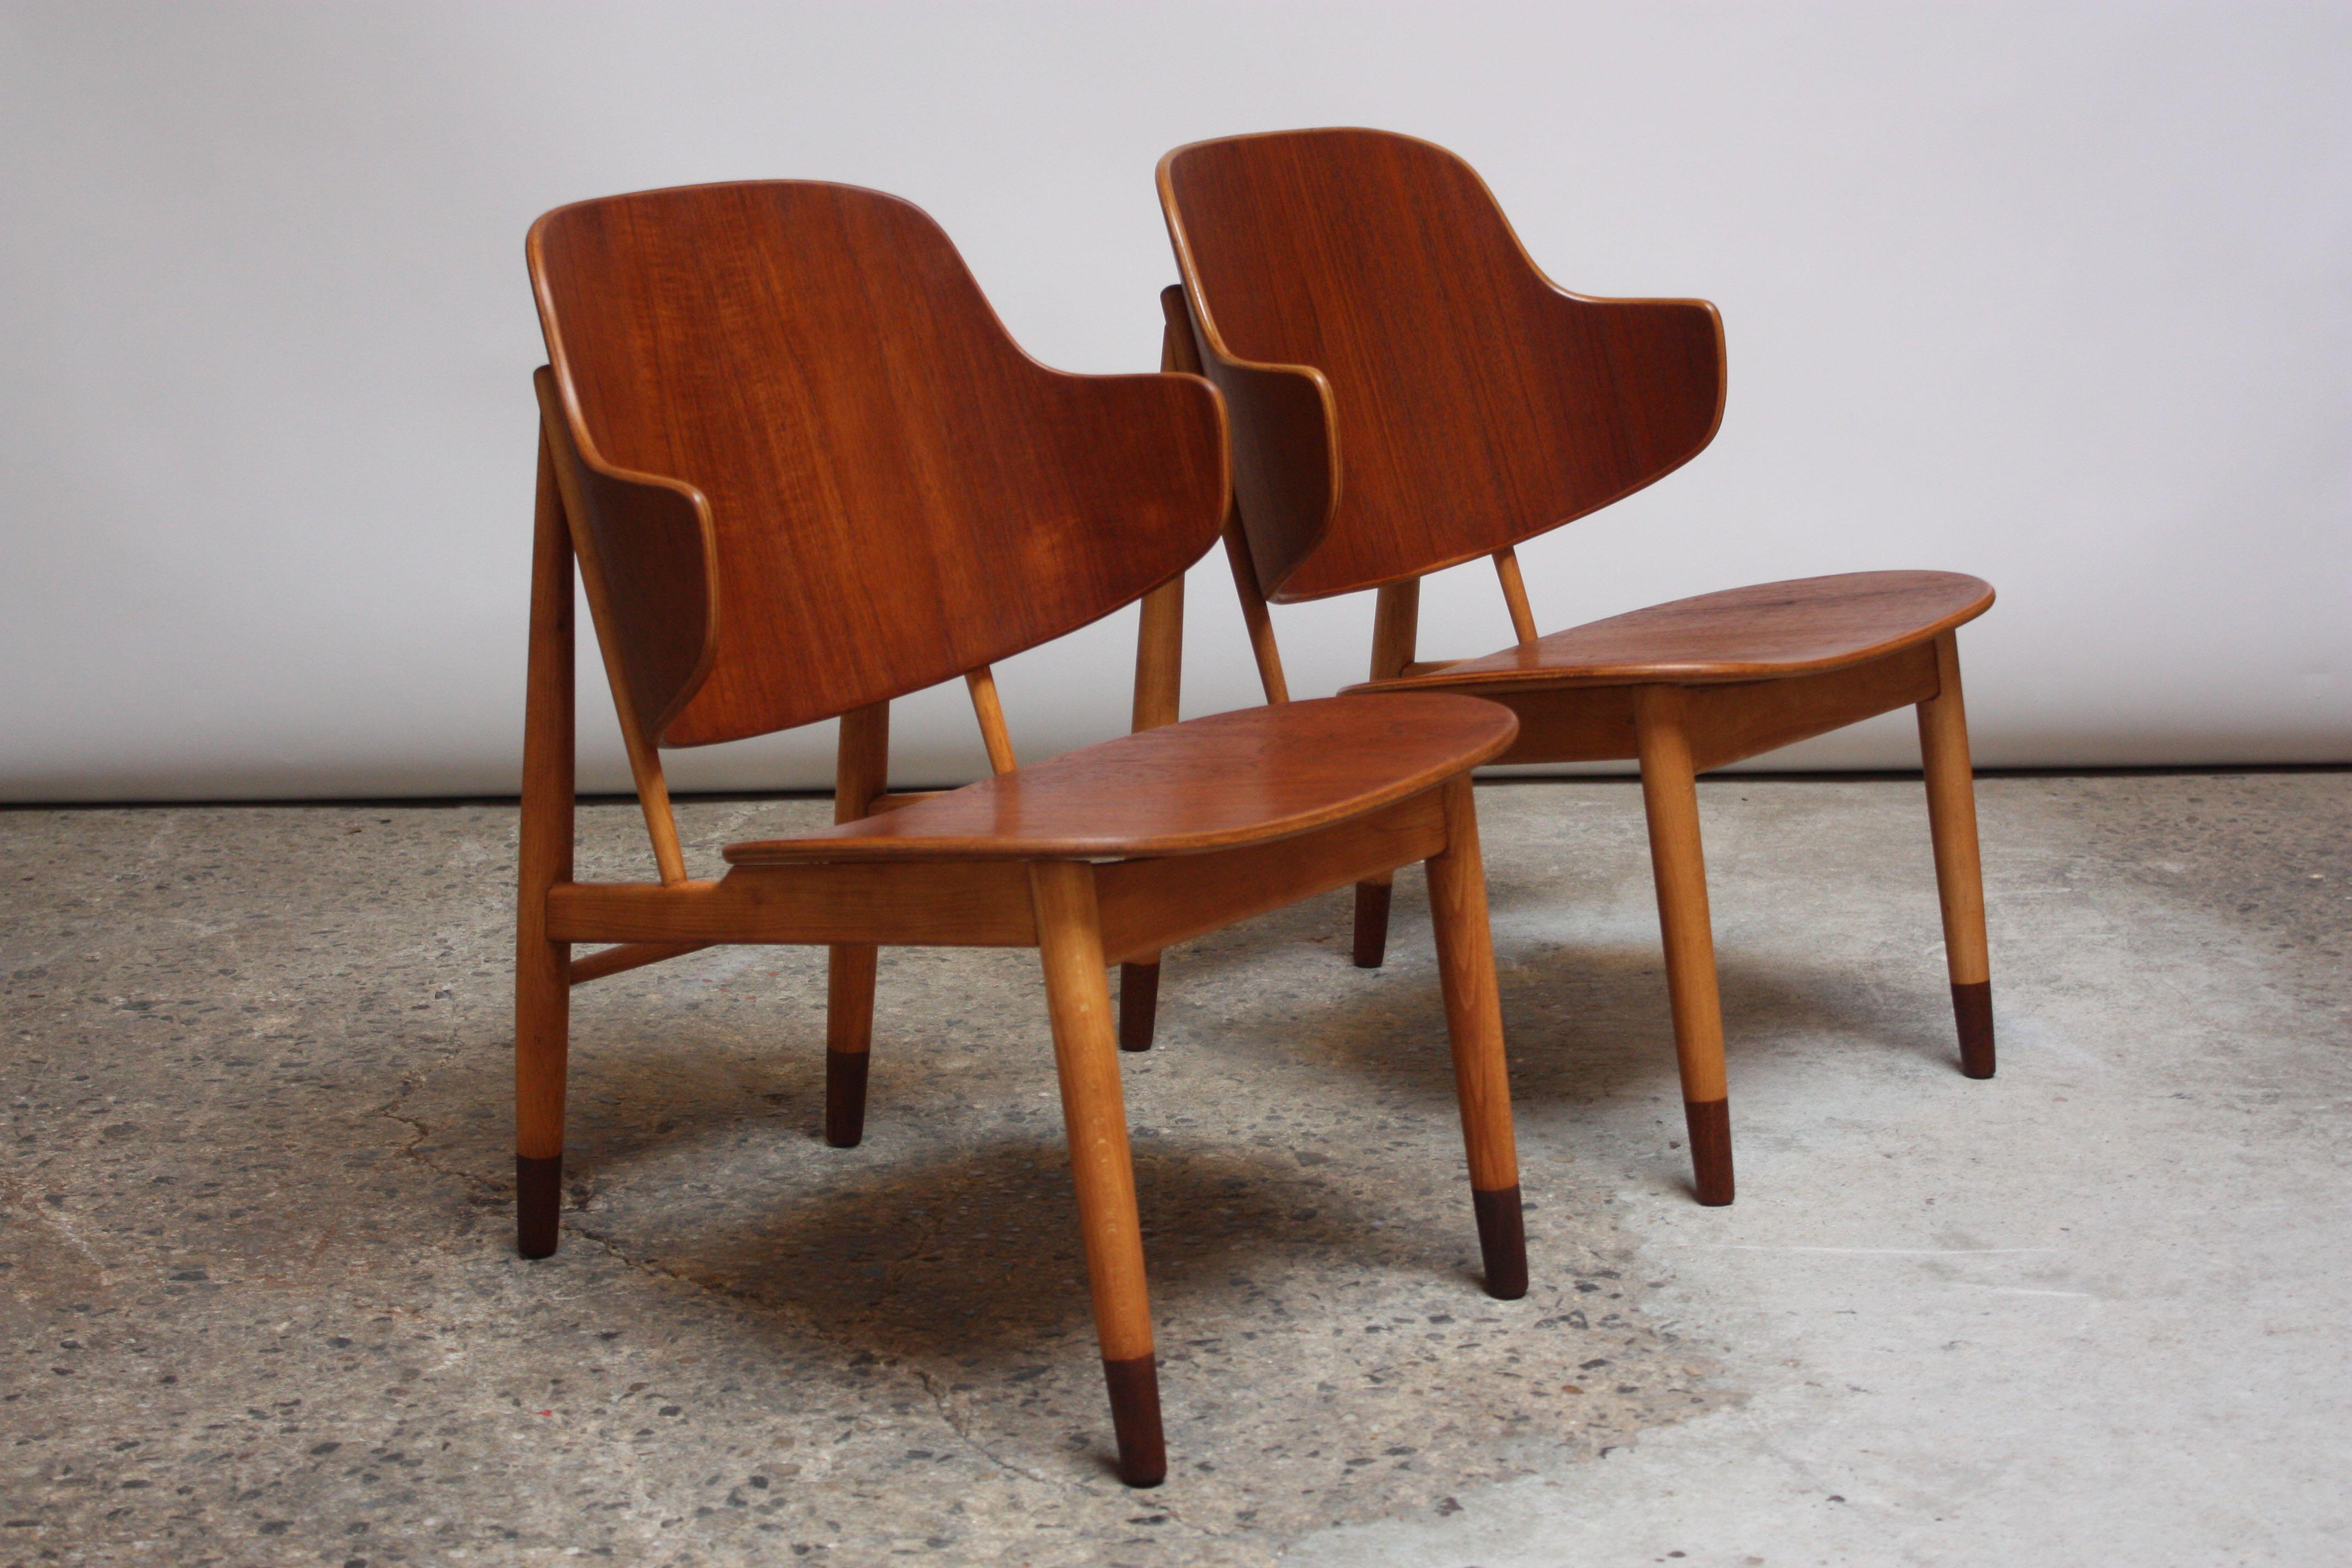 Pair of Danish Sculptural Shell Chairs by Ib Kofod-Larsen in Teak and Beech For Sale 2